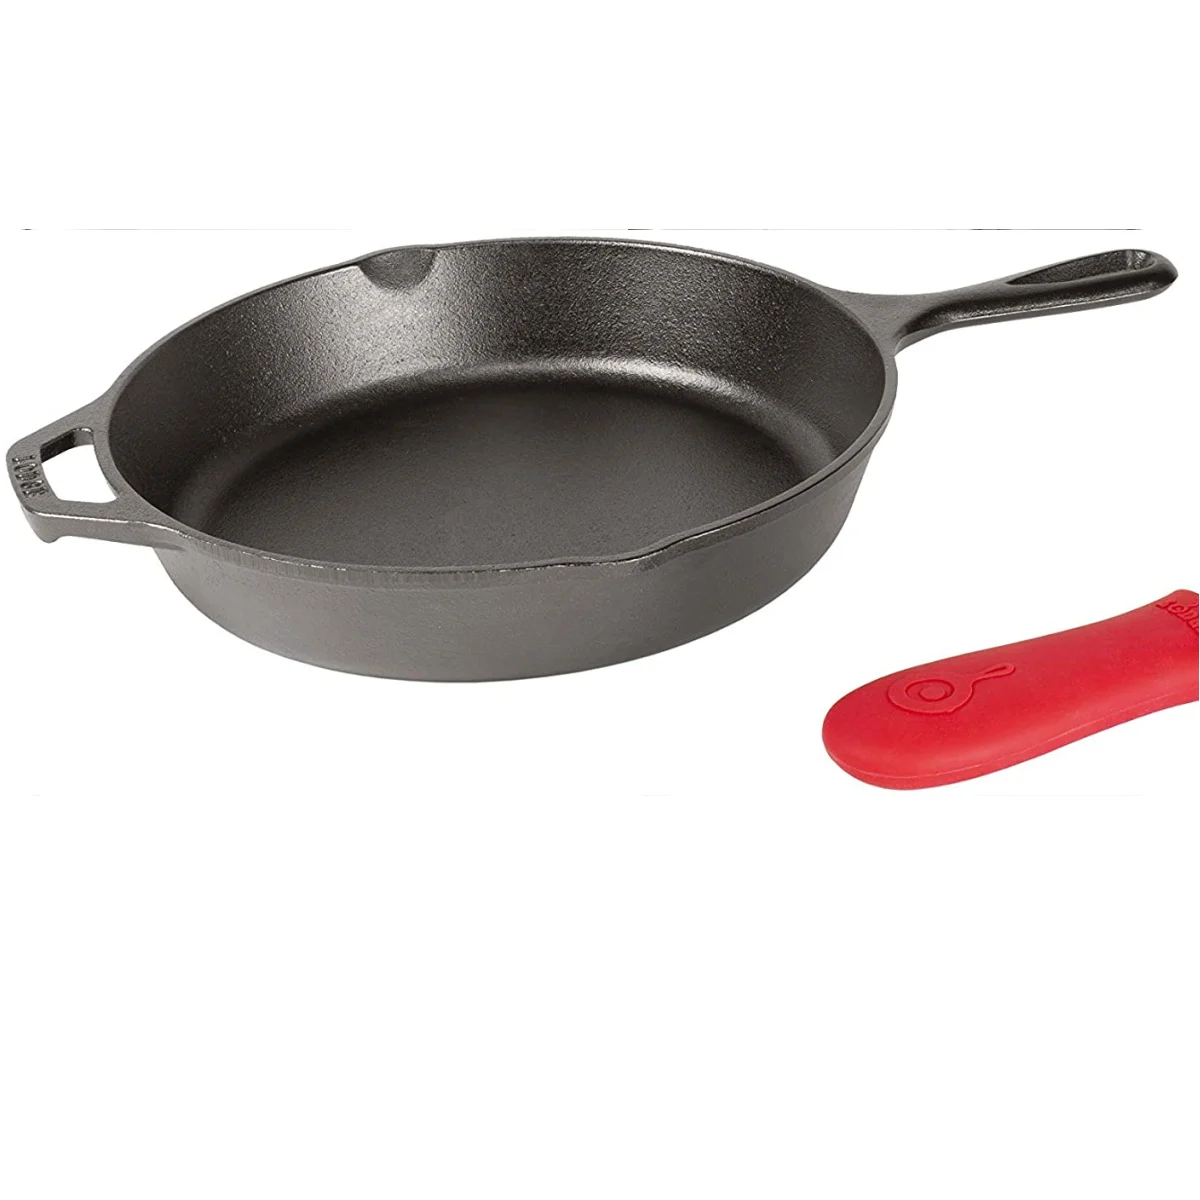 Lodge Cast Iron Skillet, Pre-Seasoned with Silicone Hot Handle Holder